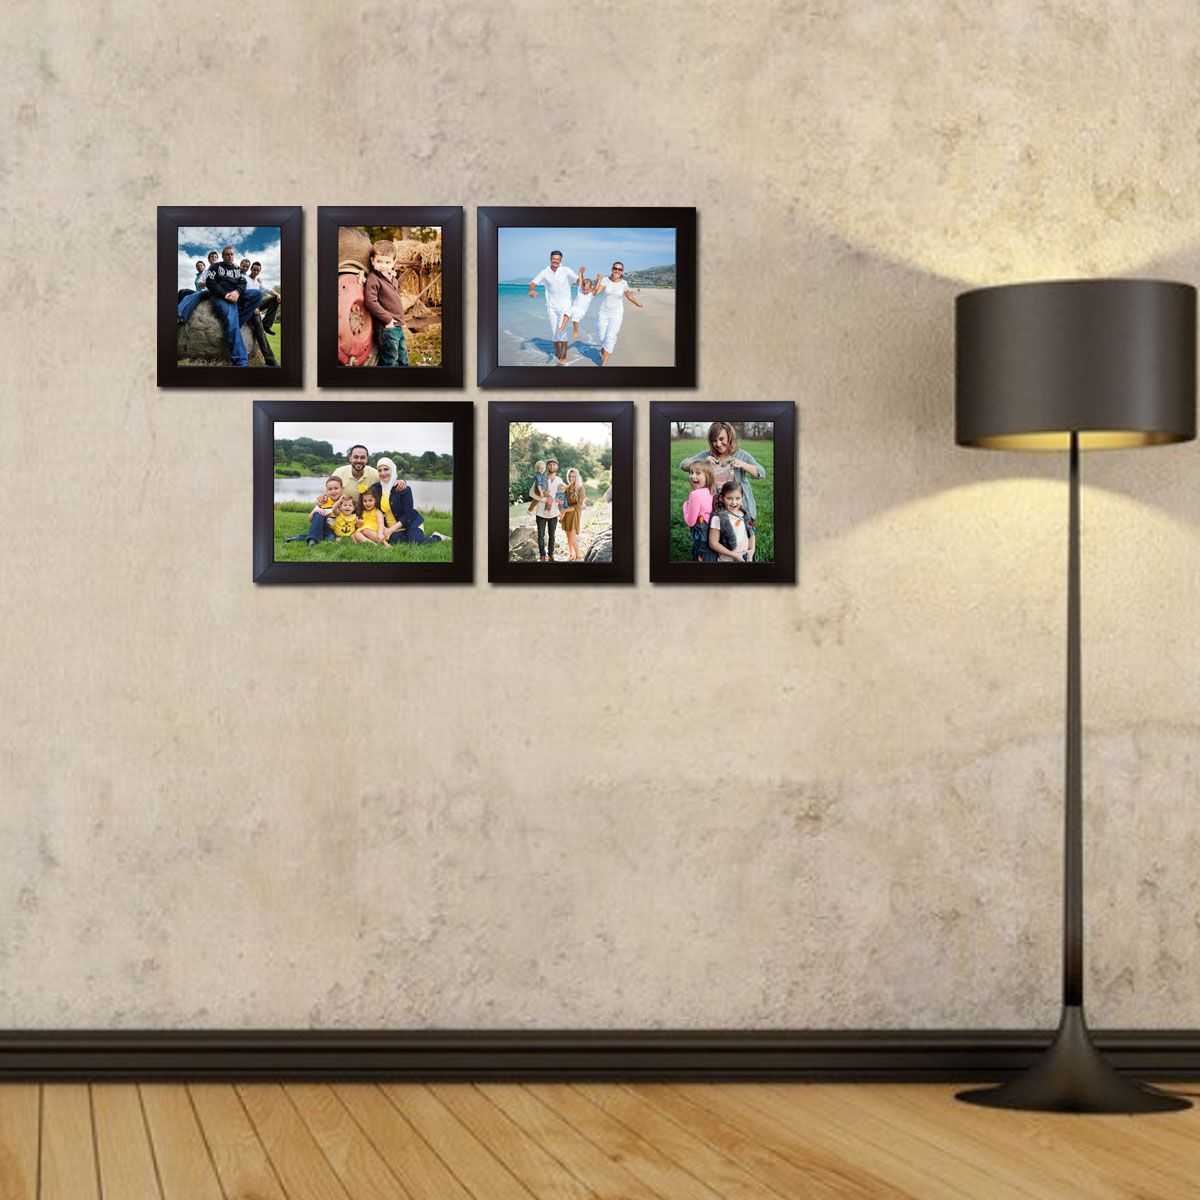 Trends on Wall Acrylic Brown Photo Frame Sets - Pack of 6